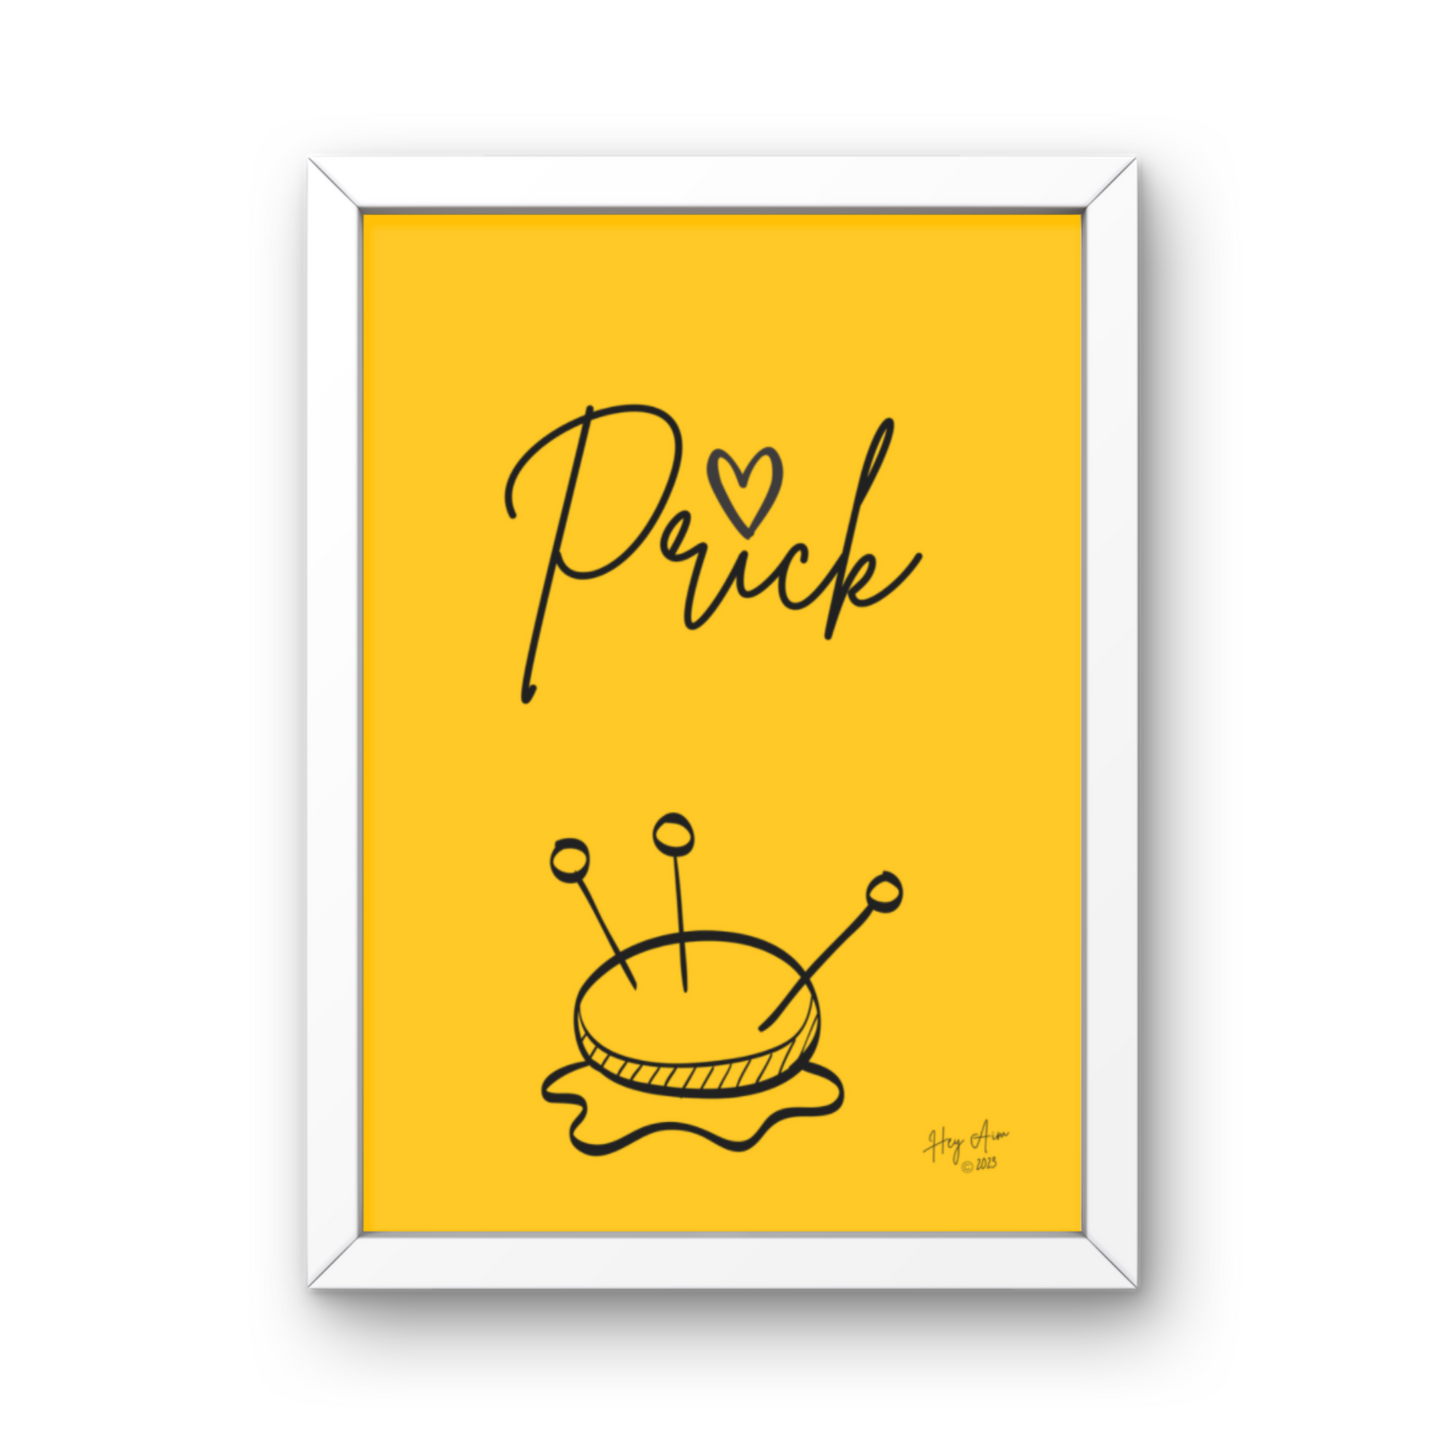 Prick | Digital Wall Art | Download Only | A3, A4, A5, A6 Sizes